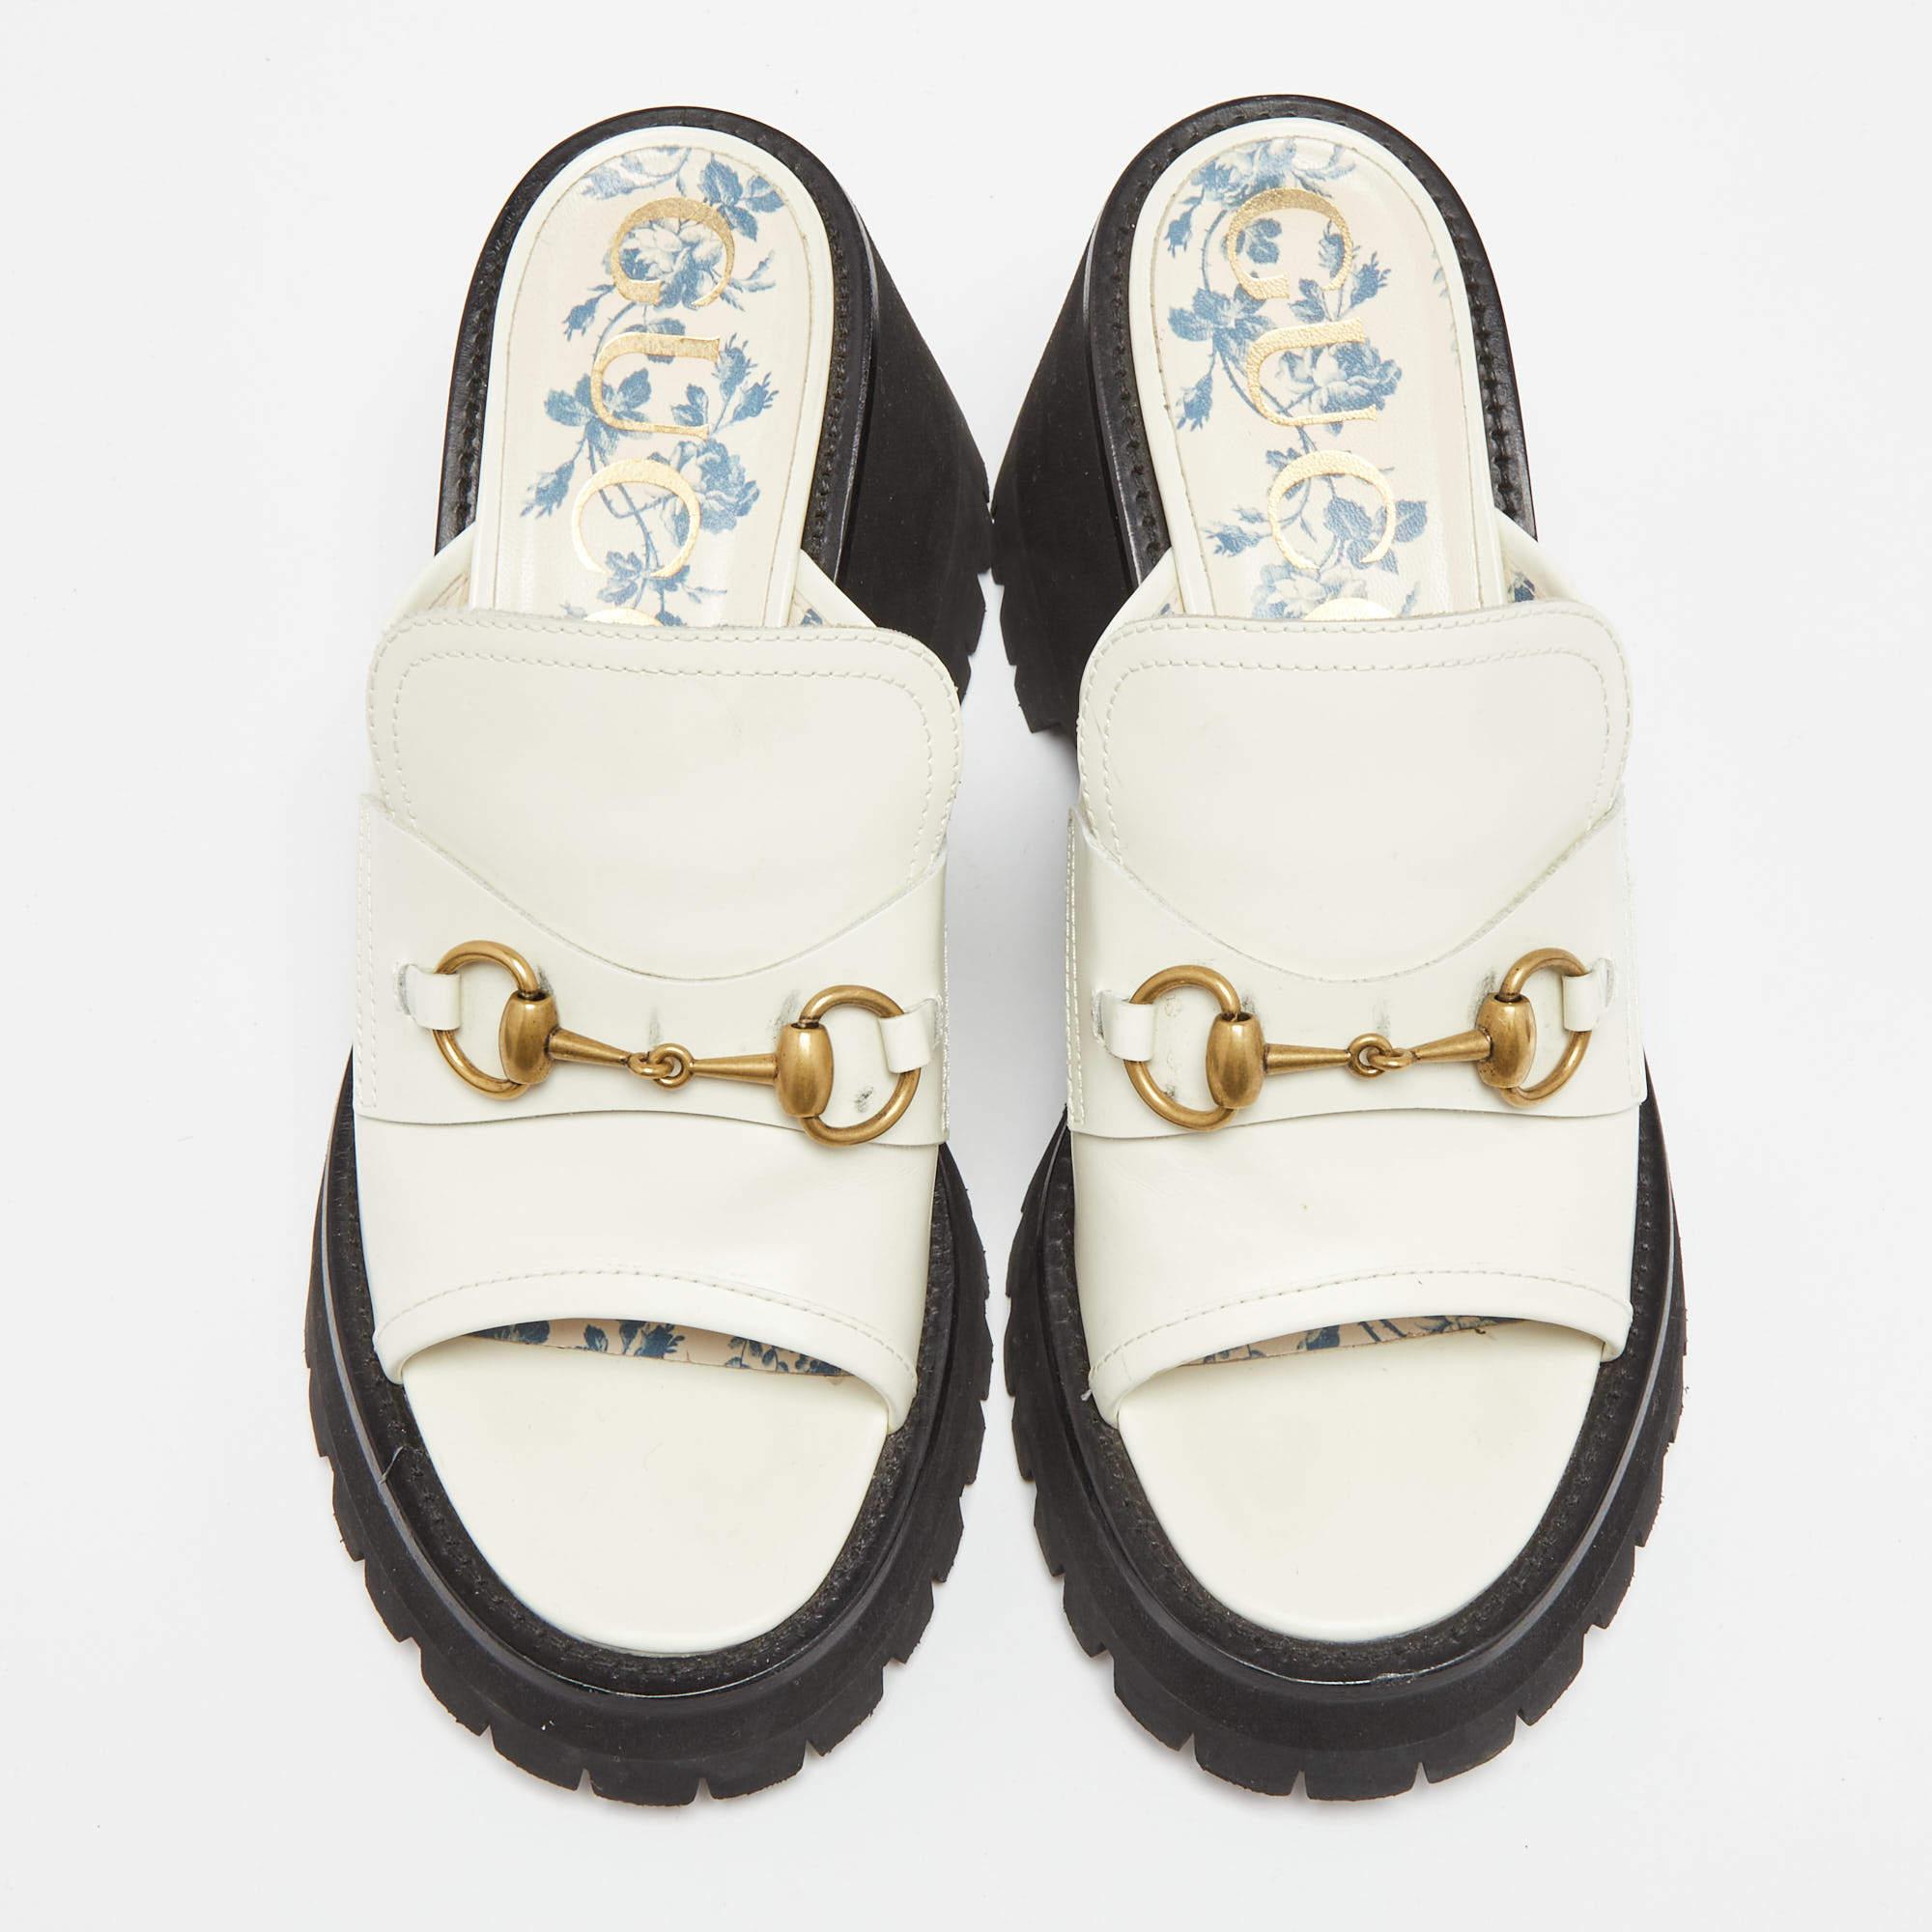 Wear these slides on days when you cannot choose between fashion and comfort, for they bring both. They are from Gucci, designed with platforms and the brand's Horsebit.

